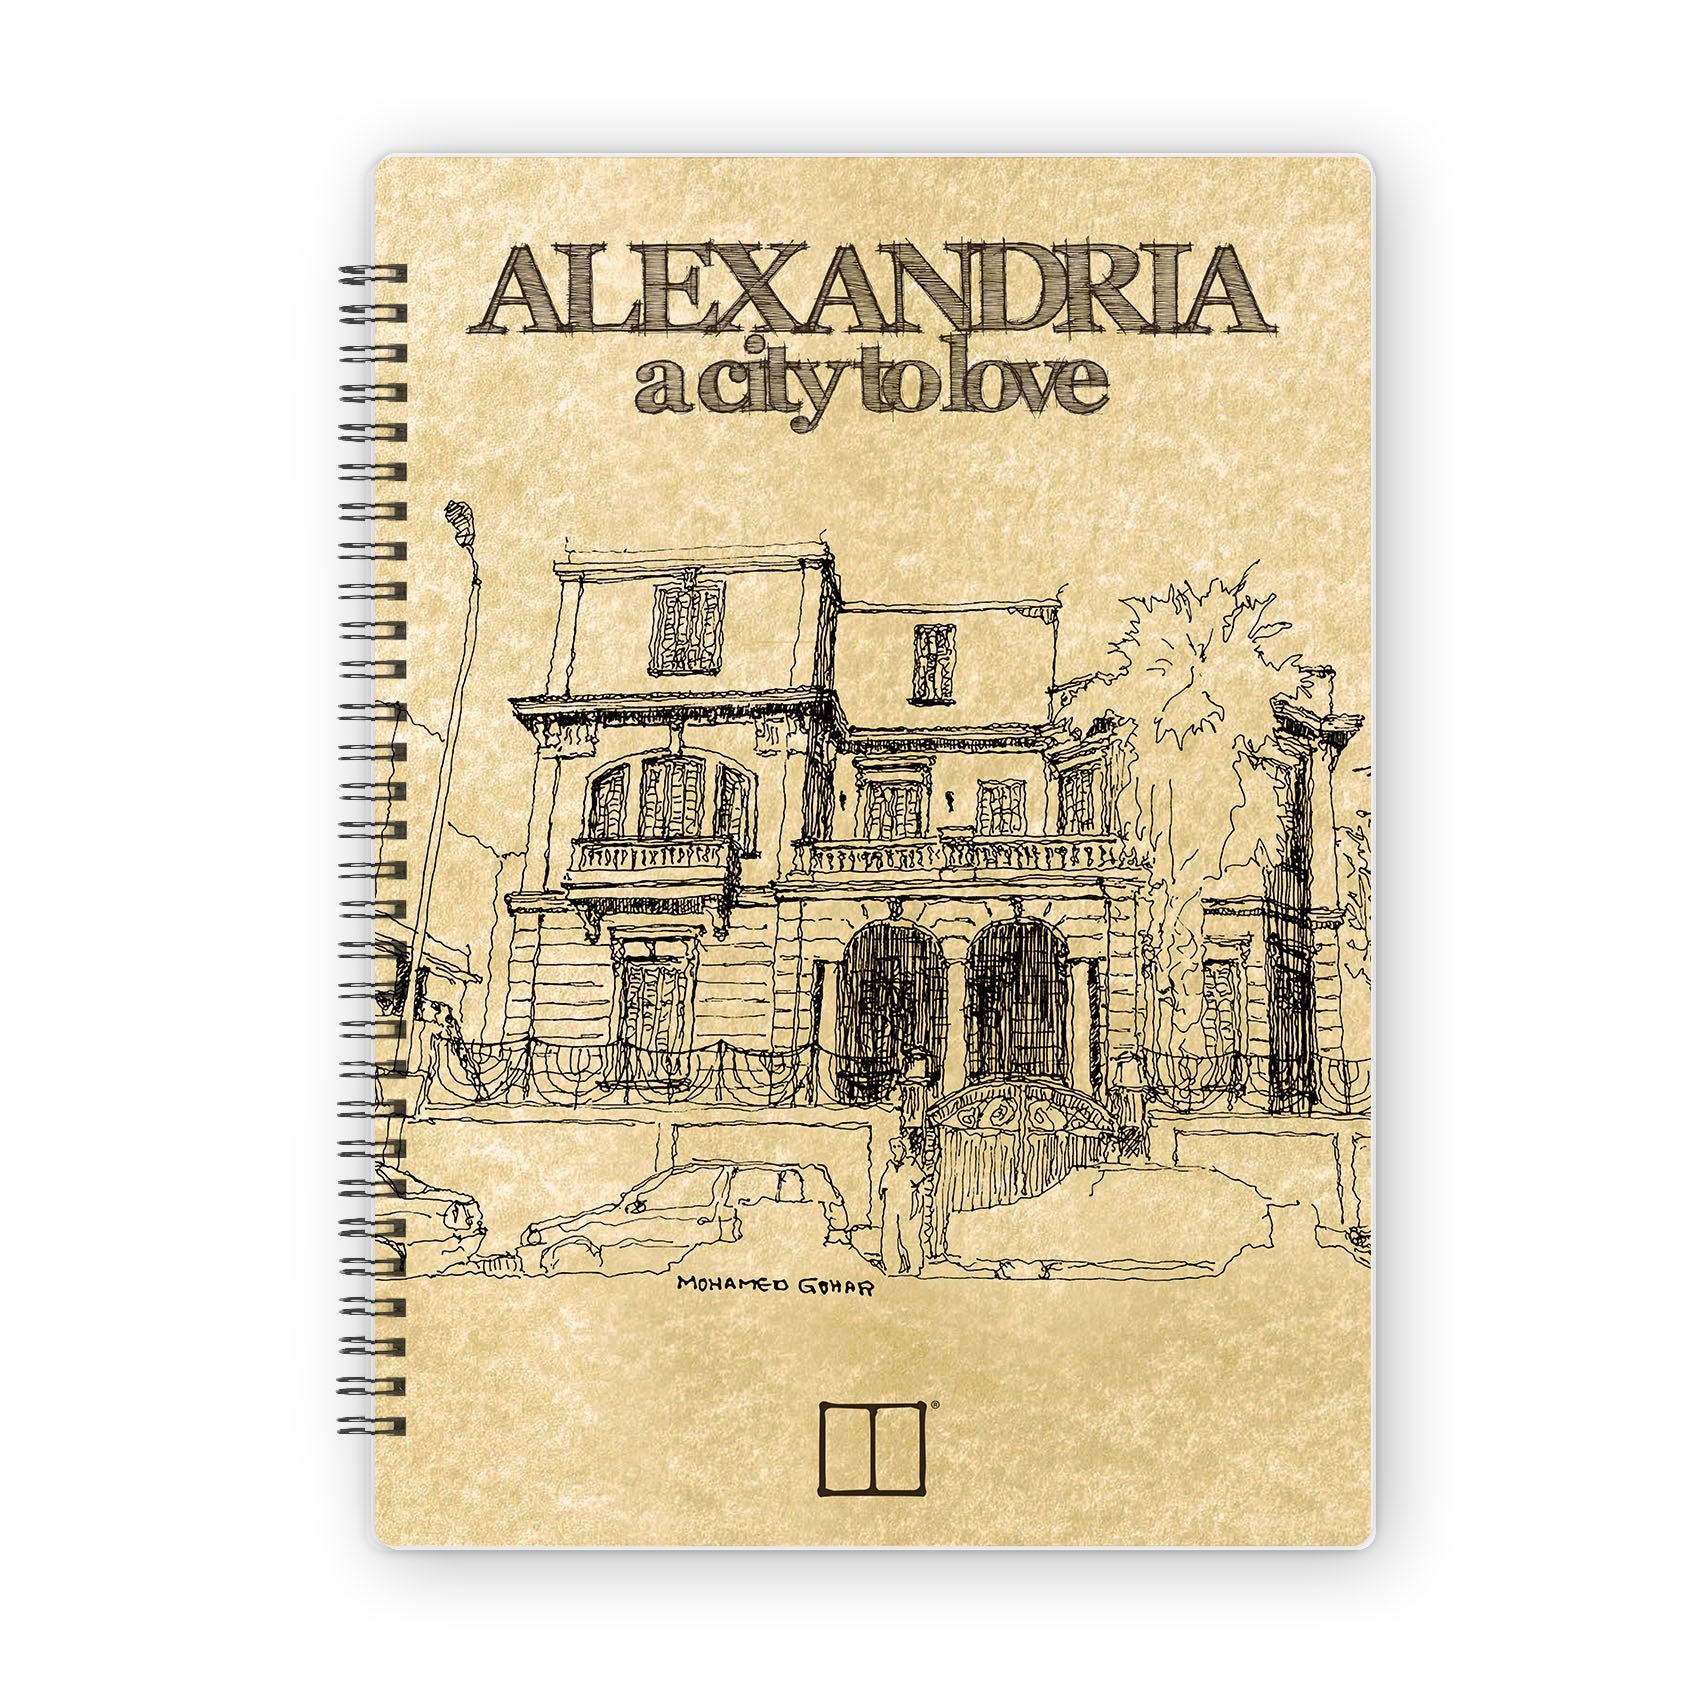 Sketchbook | 28 X 20 cm - (Alexandria a city to love) - 01 - from SketchBook Stationery